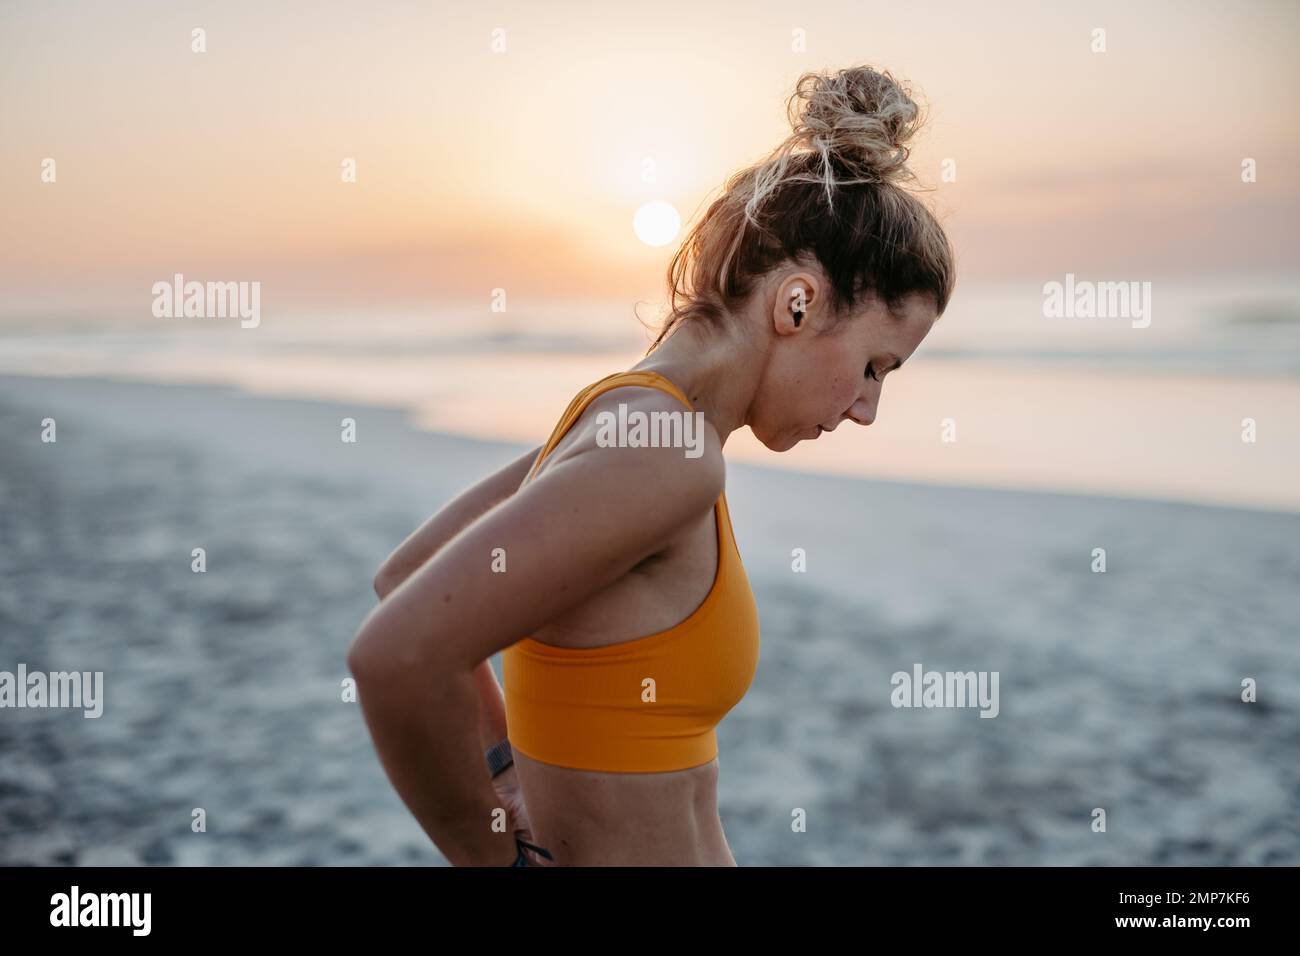 Close-up of young sportive woman at beach. Stock Photo